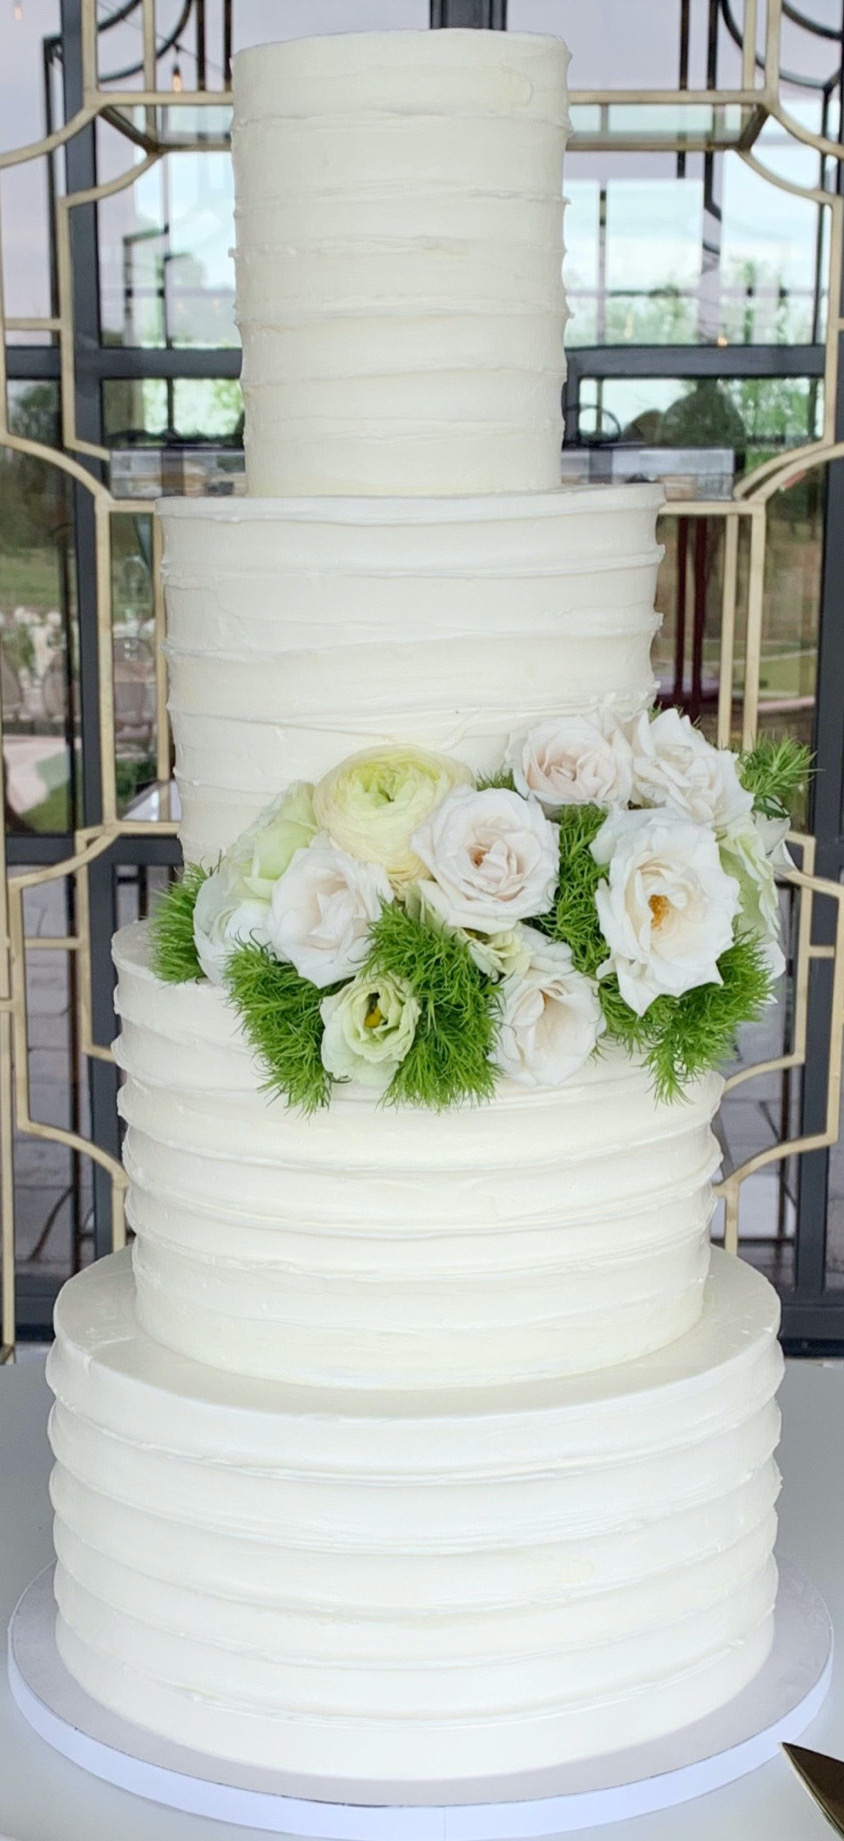 Simple four tier white cake with cream florals and greenery on second tier.